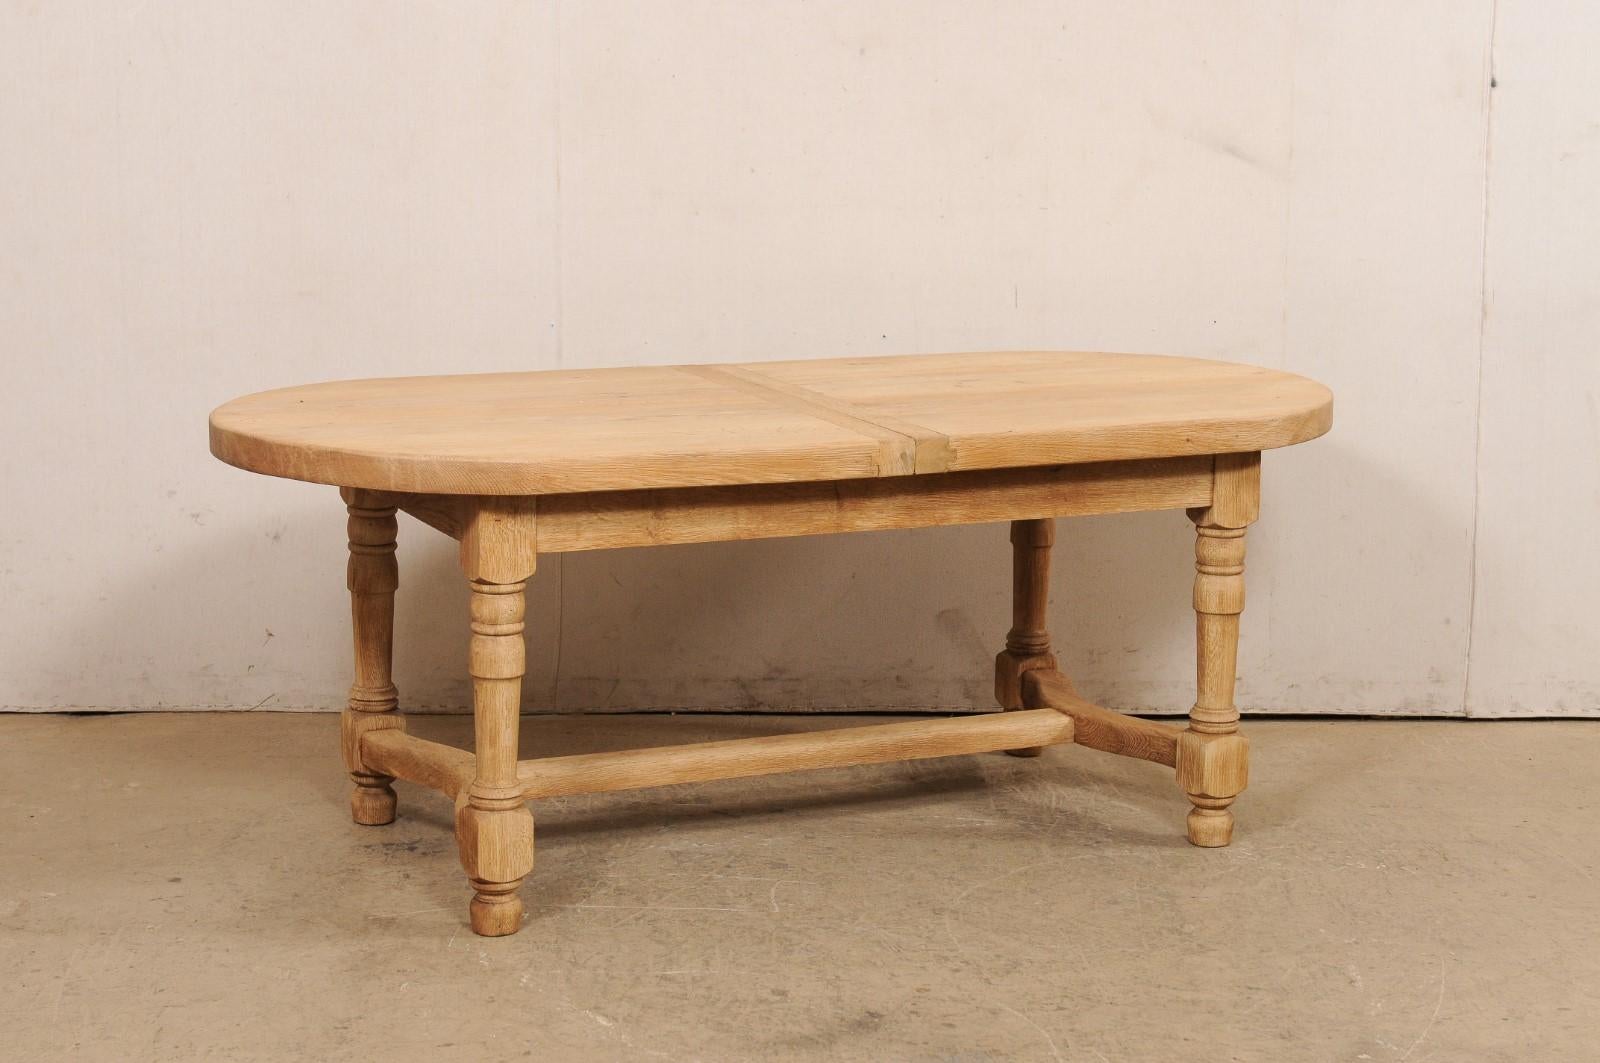 A French oval-shaped wooden table from the mid 20th century. This mid-century table from France has an oval-shaped top, which rests atop a plain apron, and raised upon four baluster-style carved legs. The legs are braced within a wood beam